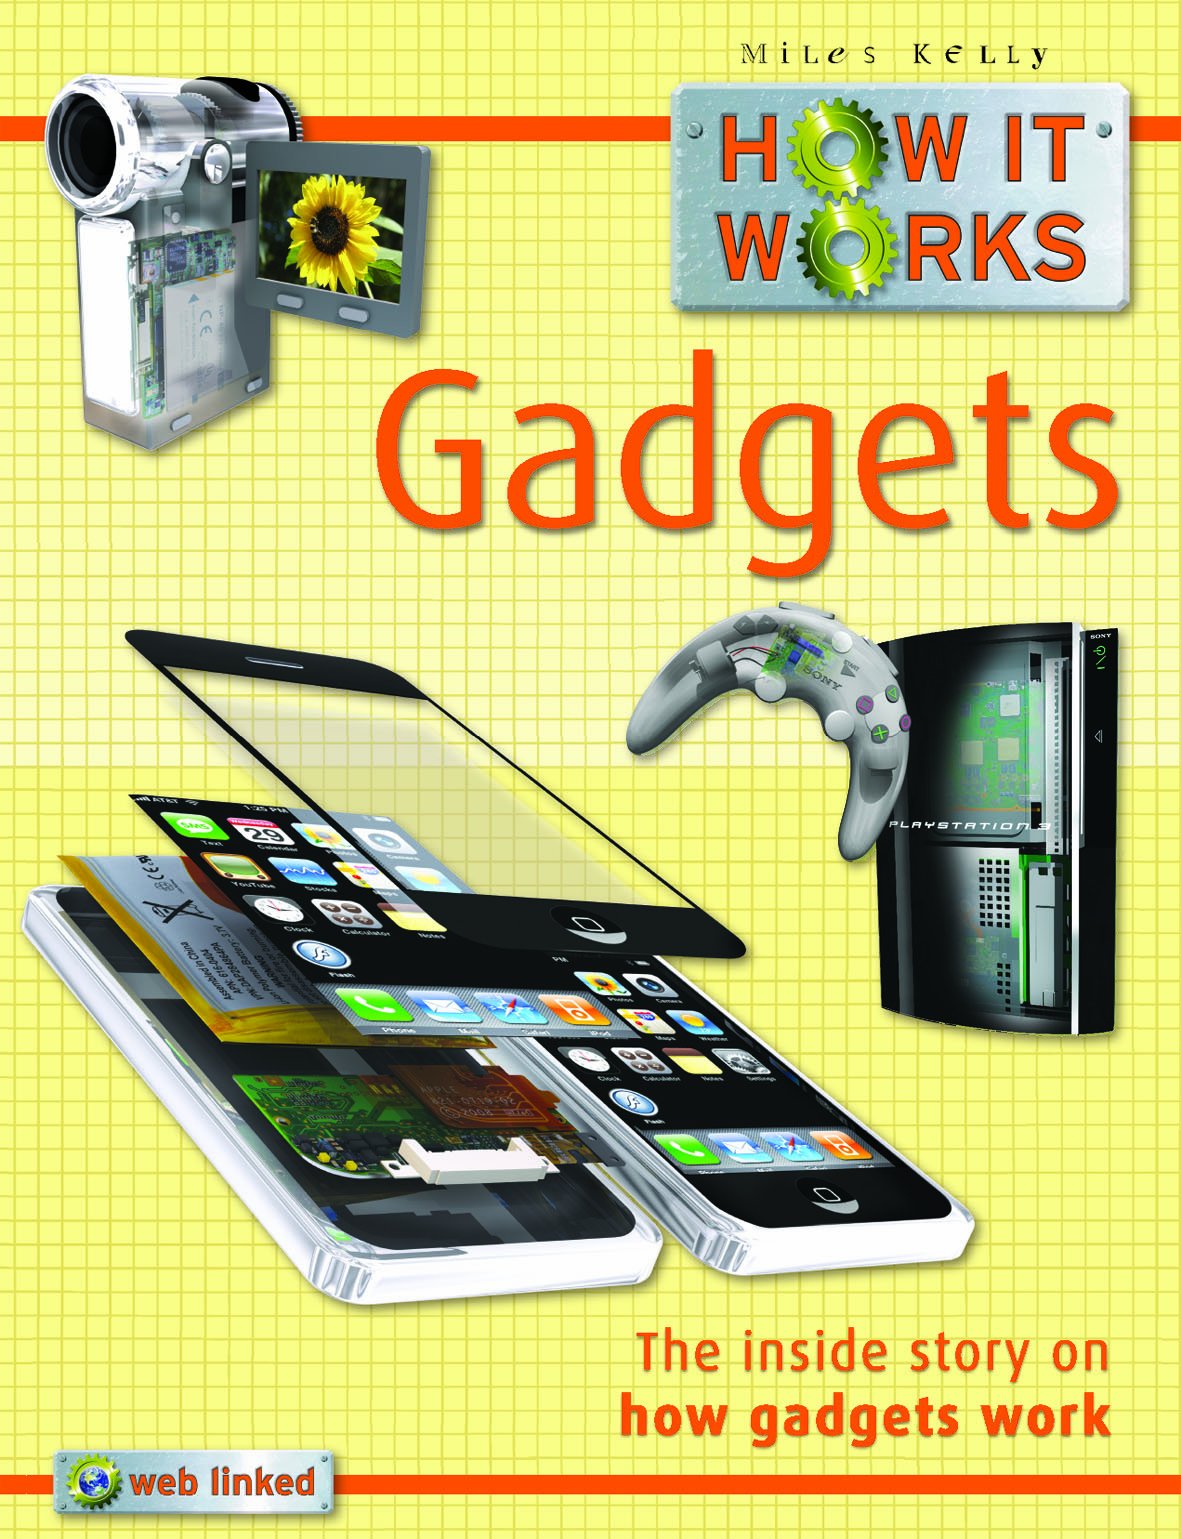 HOW IT WORKS GADGETS